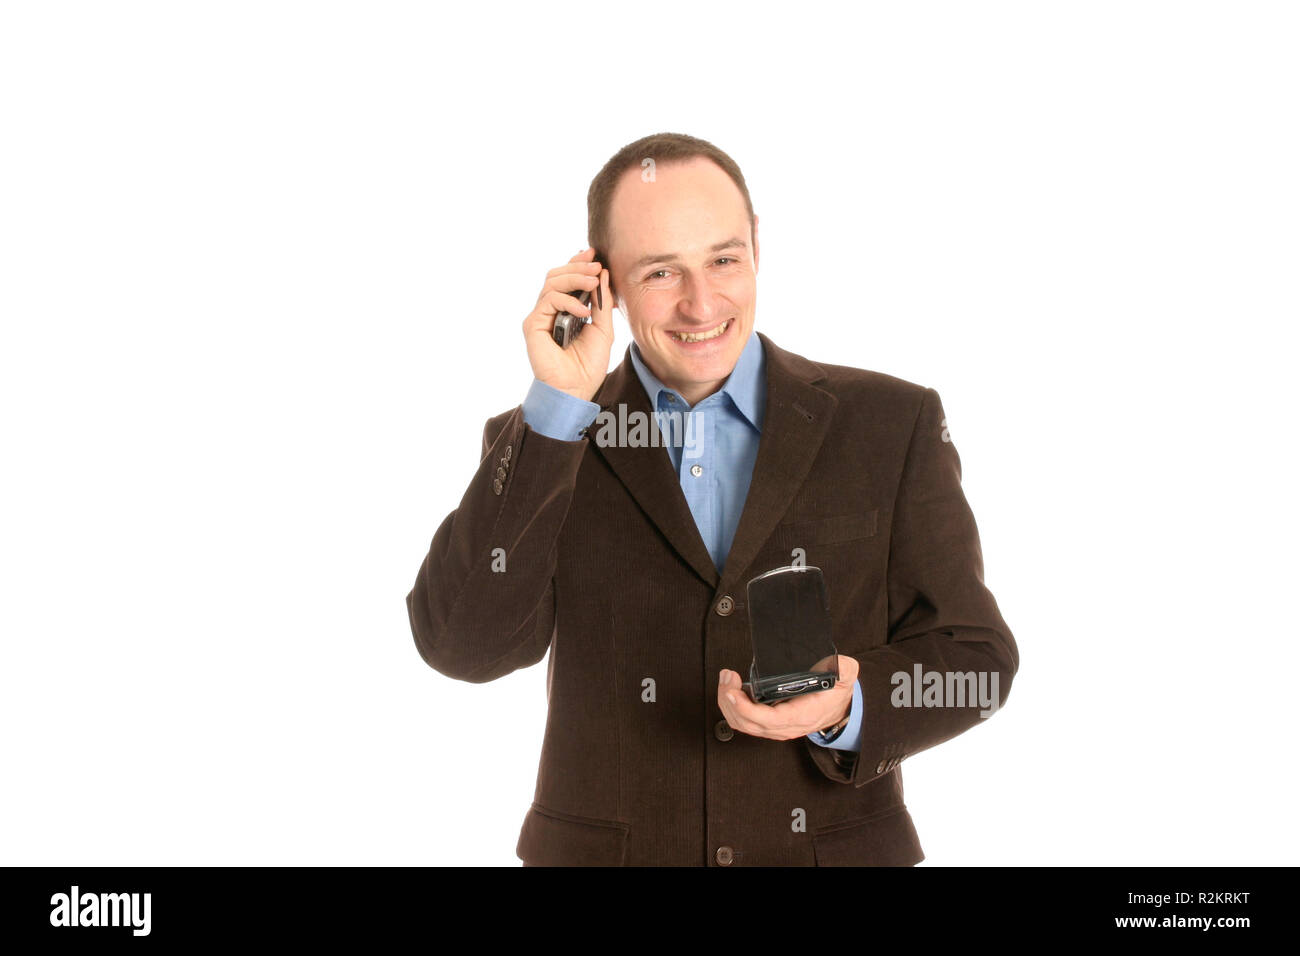 laughing businessman Stock Photo